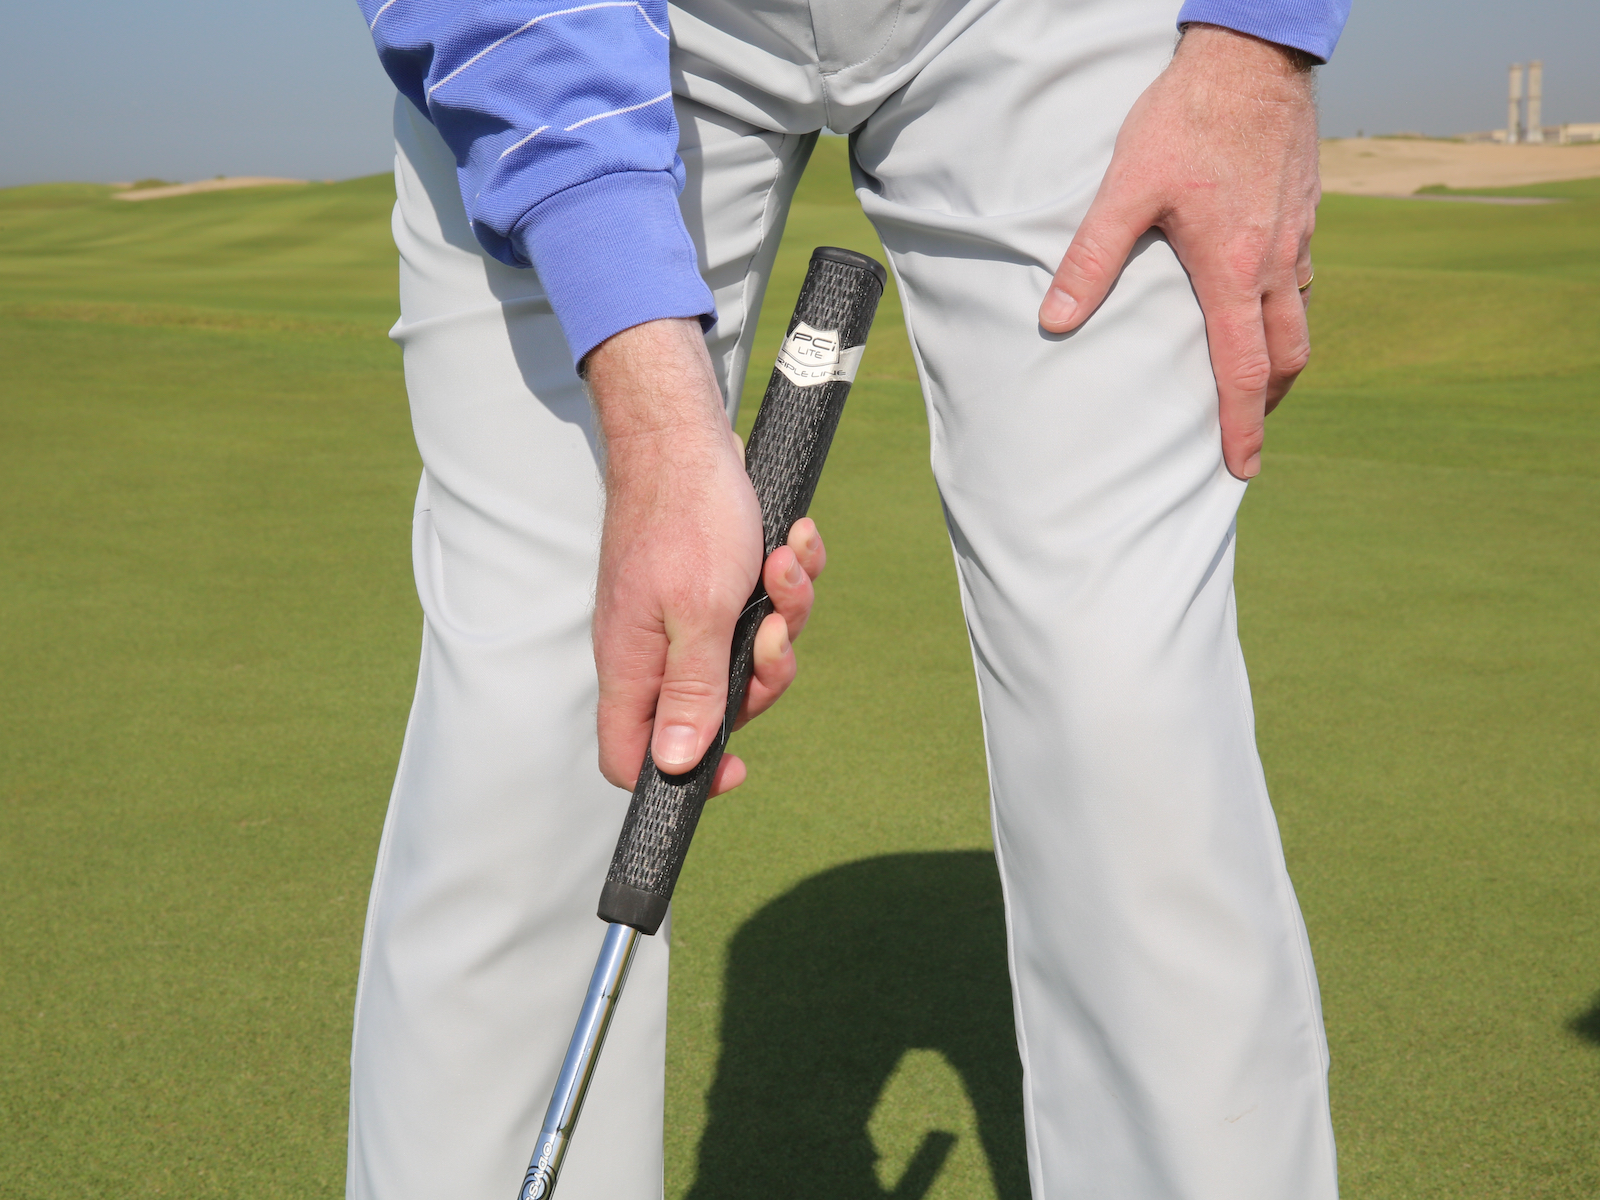 One-handed putting drill